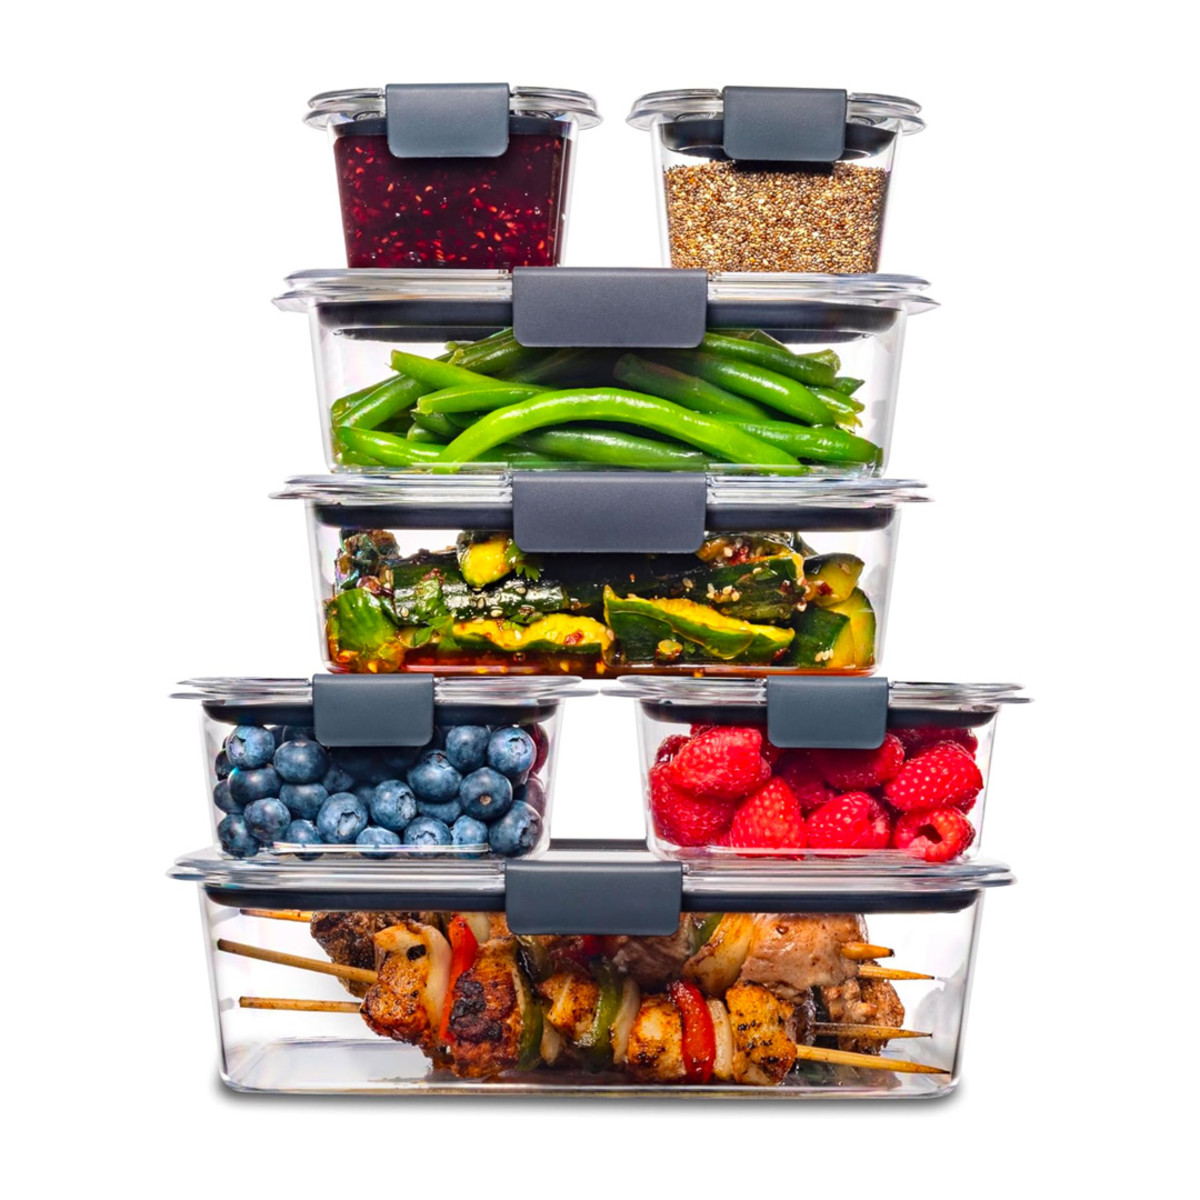 This Rubbermaid Brilliance food storage set is just $32 at